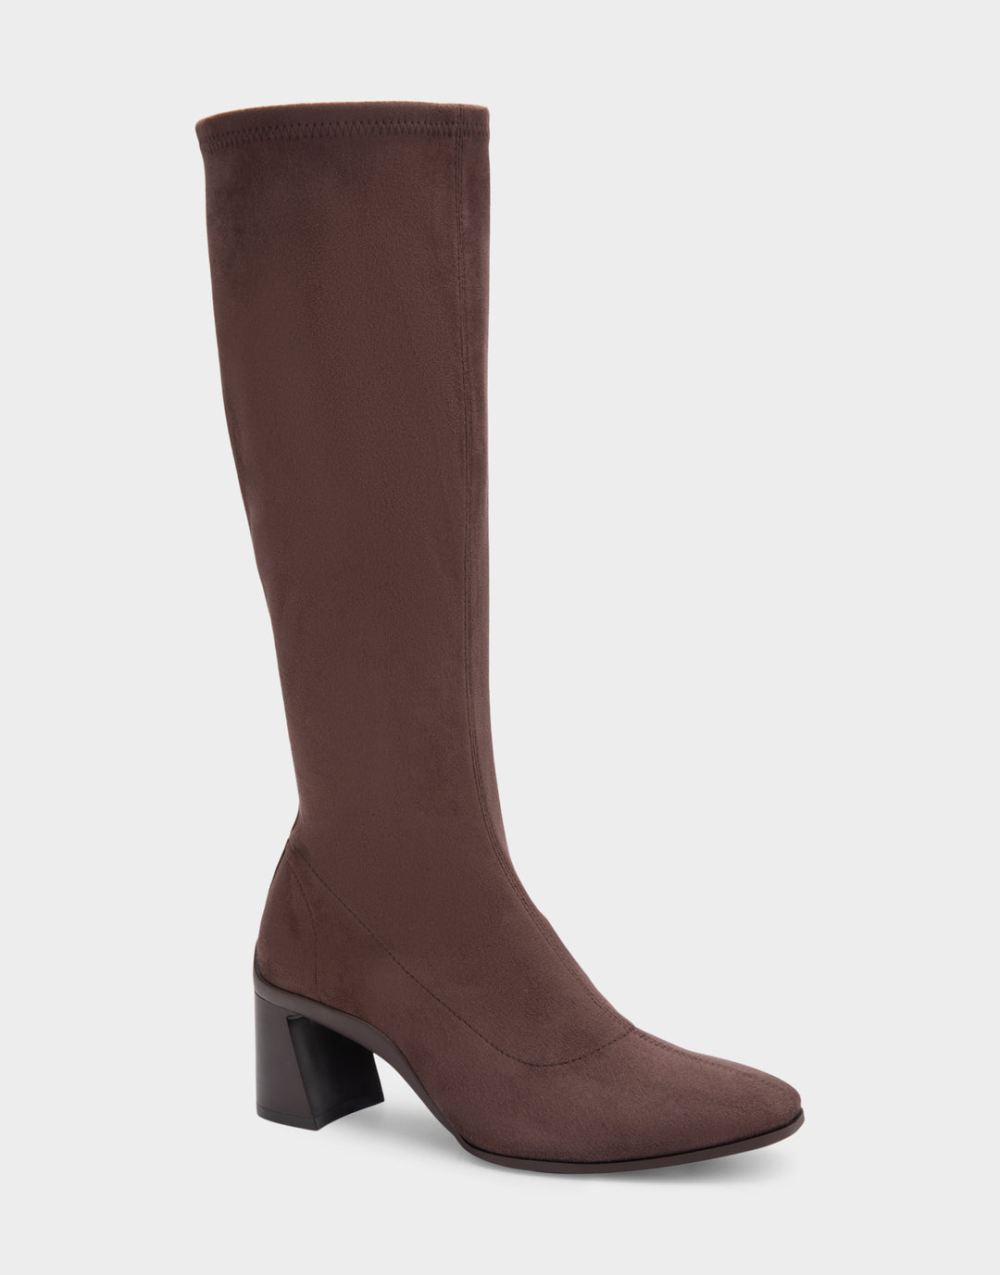 Women's | Centola Java Stretch Faux Suede Sculpted Heel Tall Shaft Boot